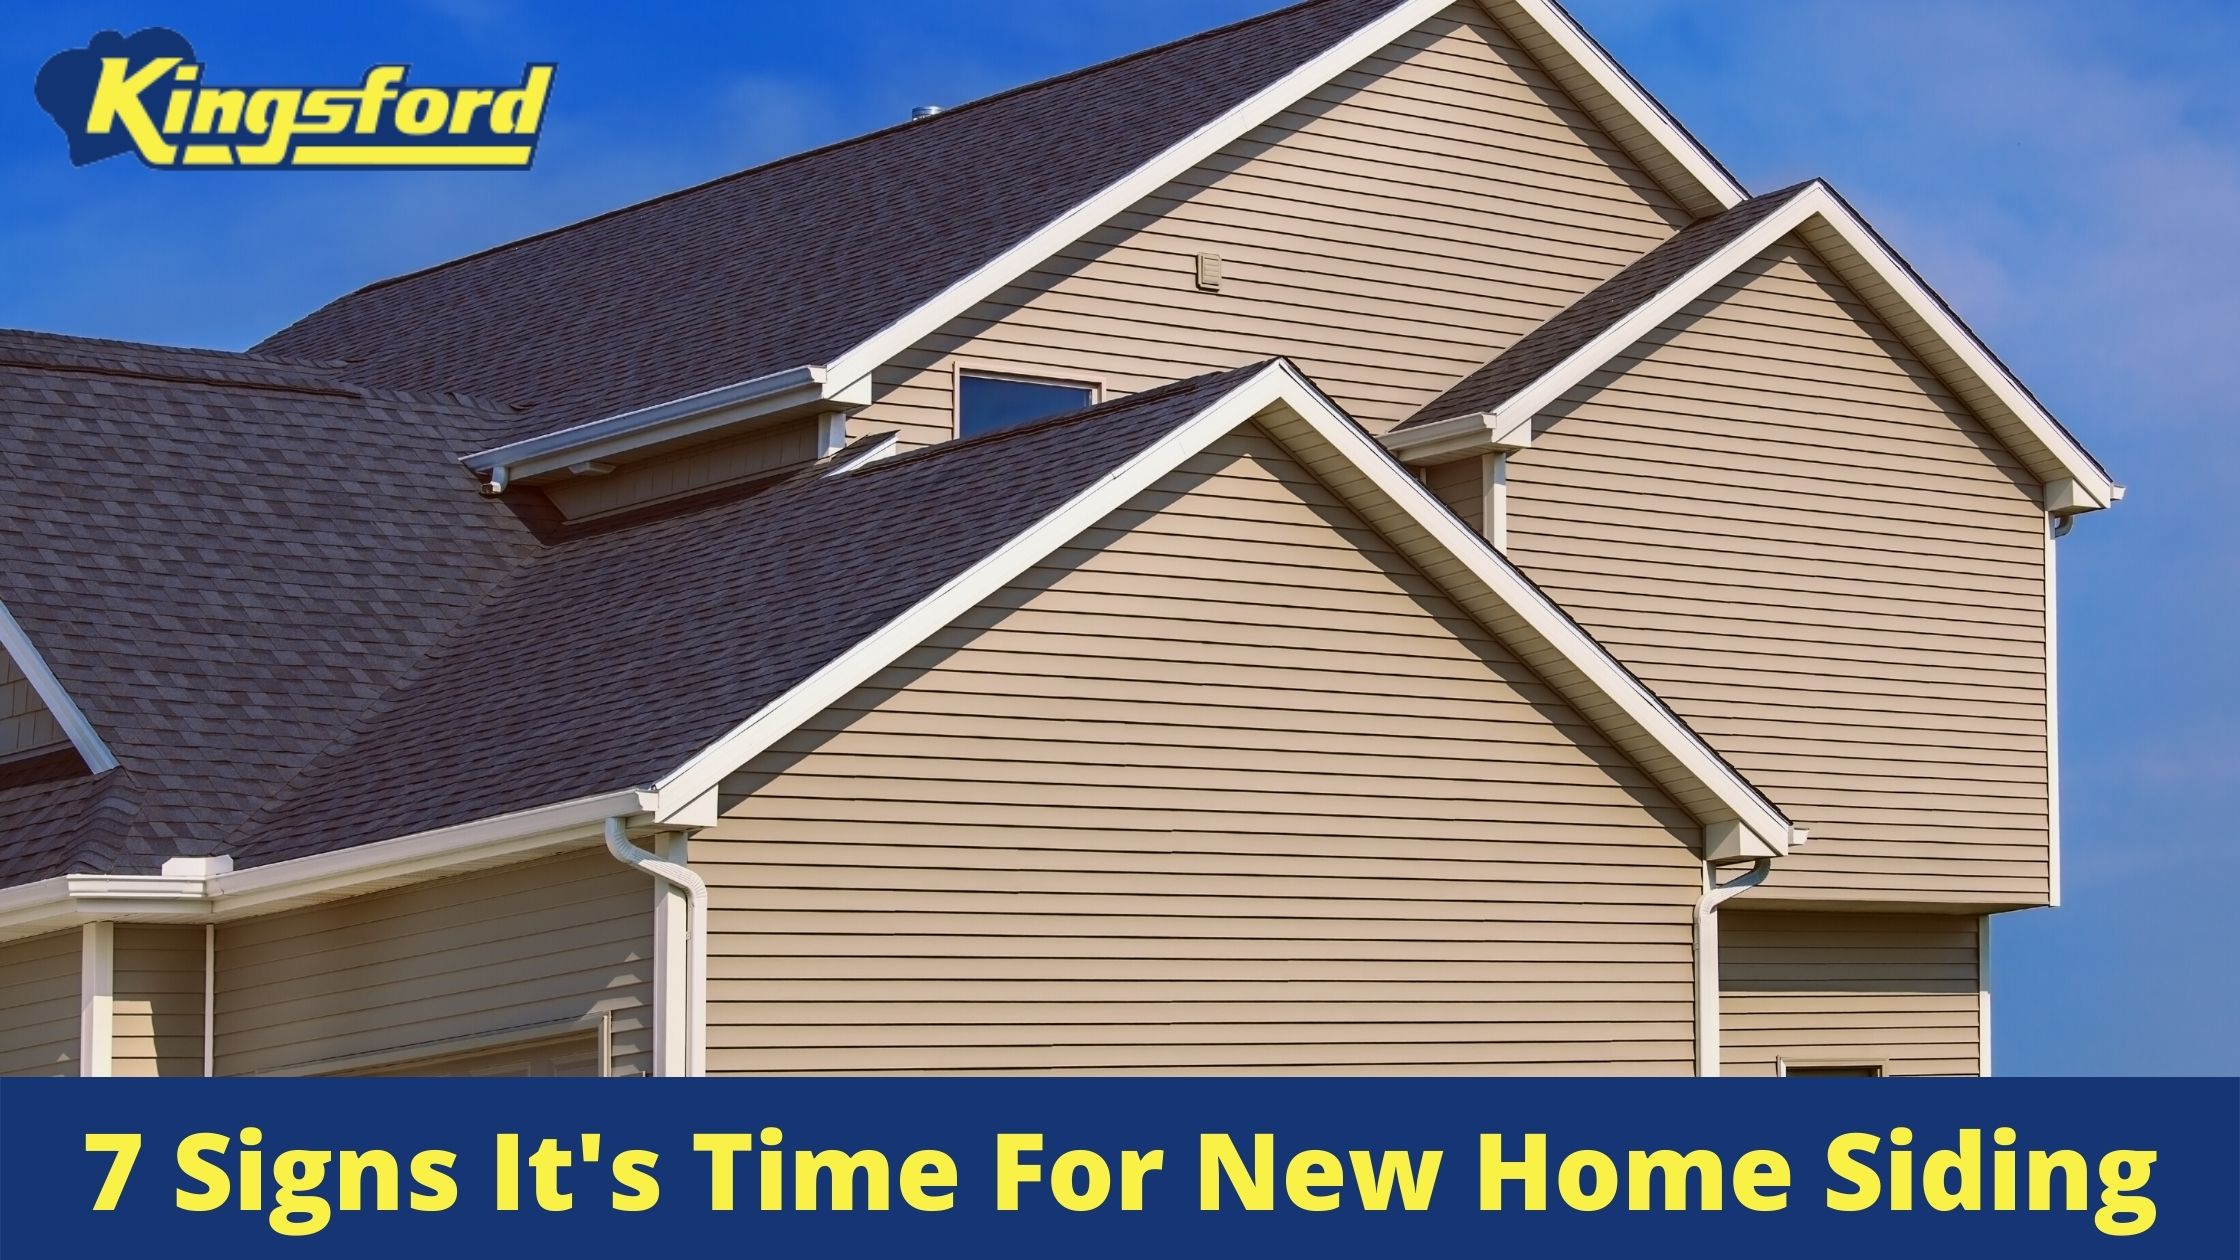 7 Signs It's Time For New Home Siding